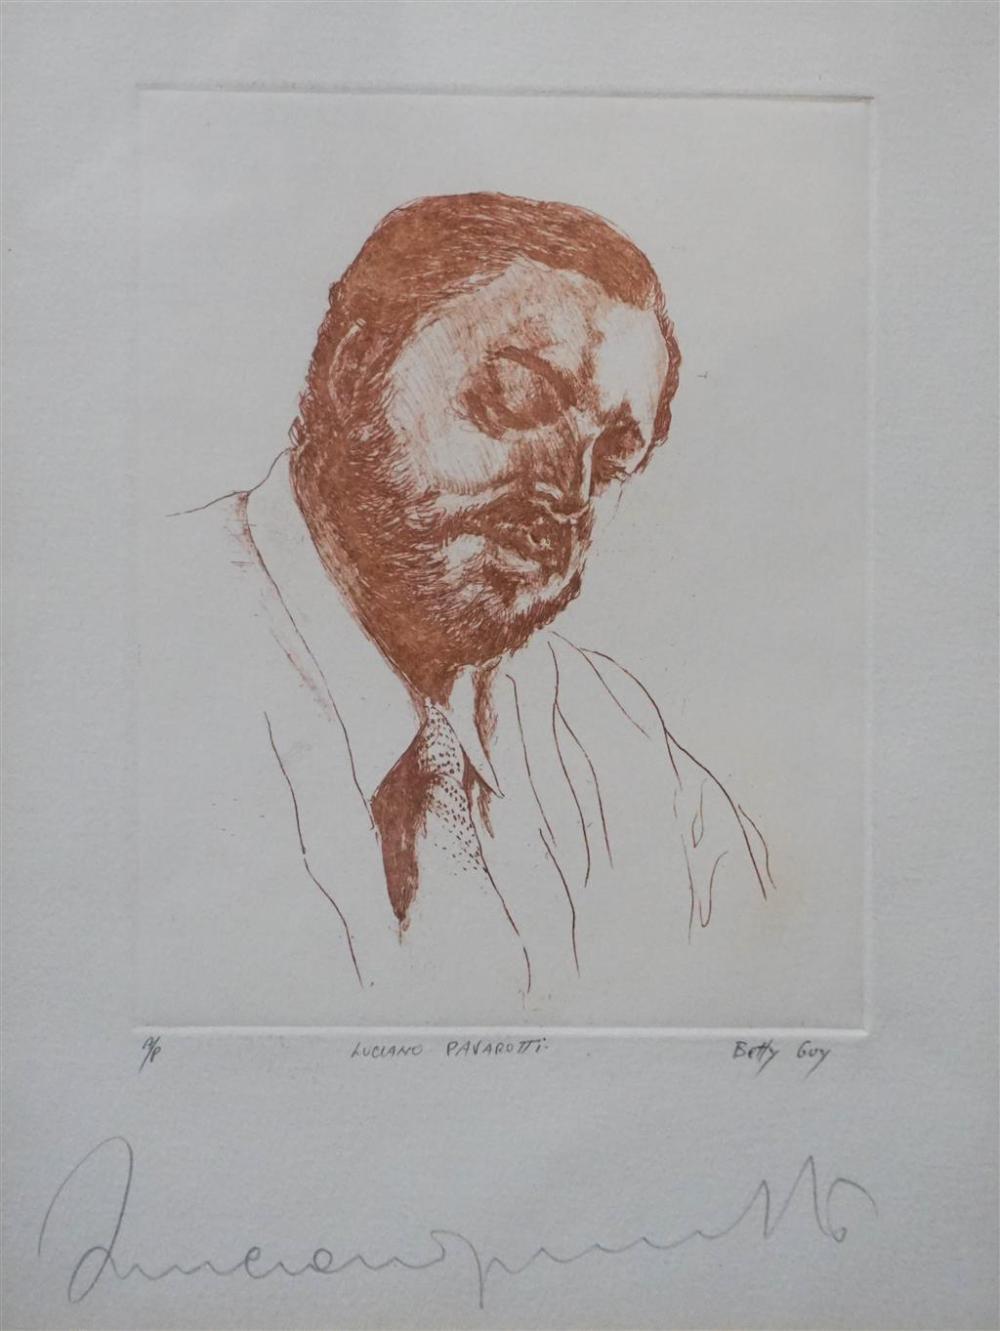 BETTY GUY, LUCIANO PAVAROTTI, ETCHING,